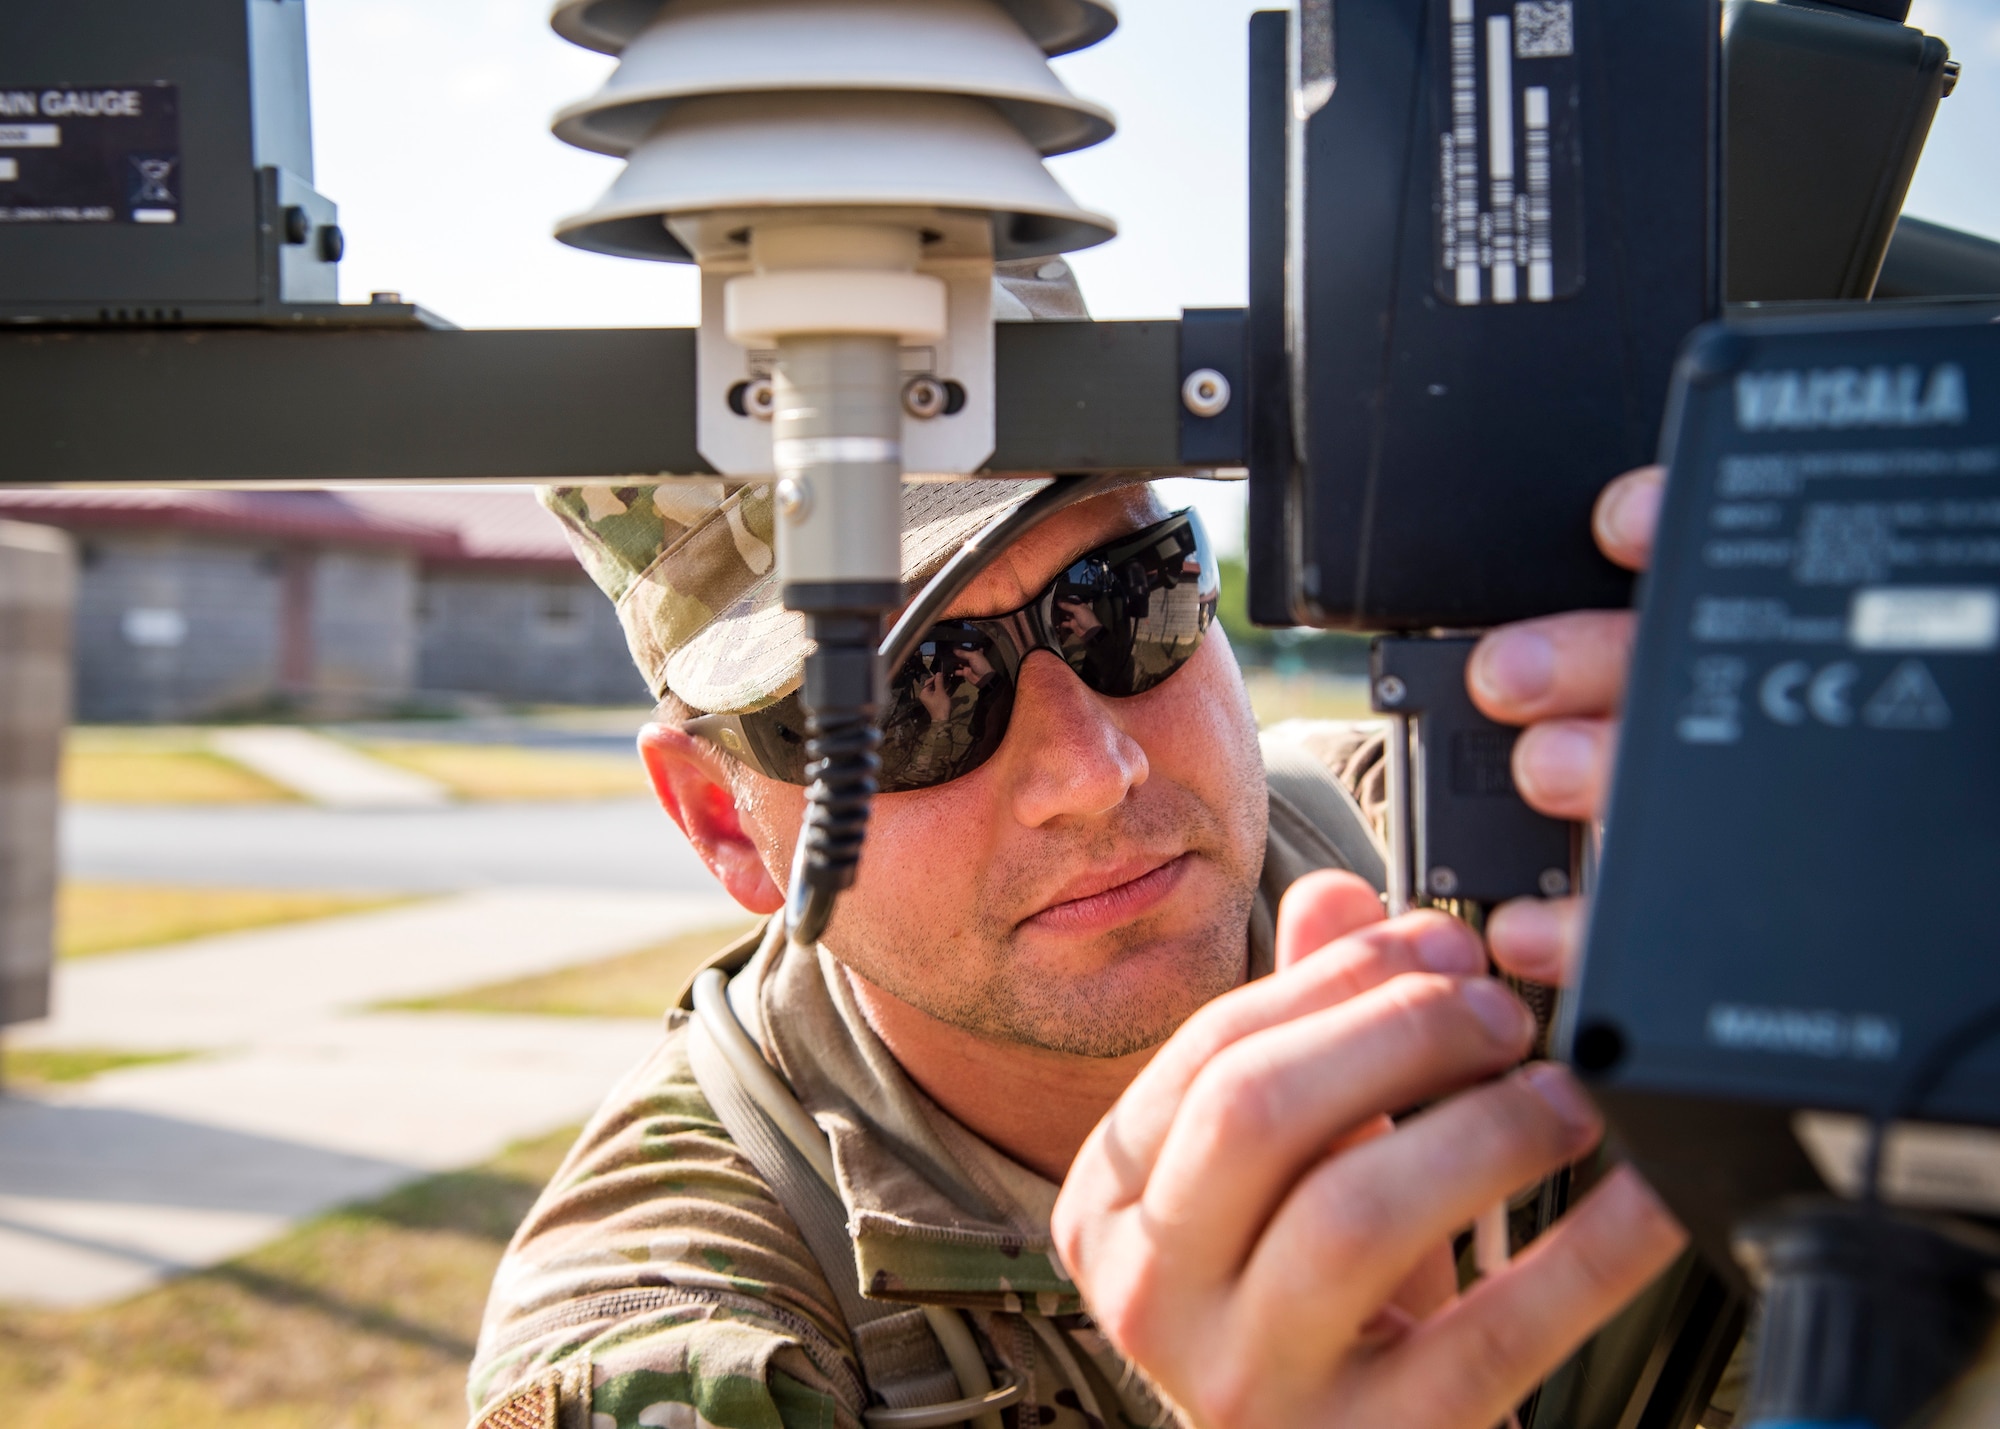 Staff Sgt. Richard Wilson, 3d Weather Squadron (WS) weather forecaster, installs a component of a tactical meteorological observing system during a certification field exercise (CFX), July 31, 2019, at Camp Bowie Training Center, Texas. The CFX was designed to evaluate the squadron’s overall tactical ability and readiness to provide the U.S. Army with full spectrum environmental support to the Joint Task Force (JTF) fight. While deployed, the Army relies on the 3d WS to provide them with current ground weather reports. These reports are then employed by commanders on the ground as they plan the best tactics and approaches to accomplish the mission. (U.S. Air Force photo by Airman 1st Class Eugene Oliver)